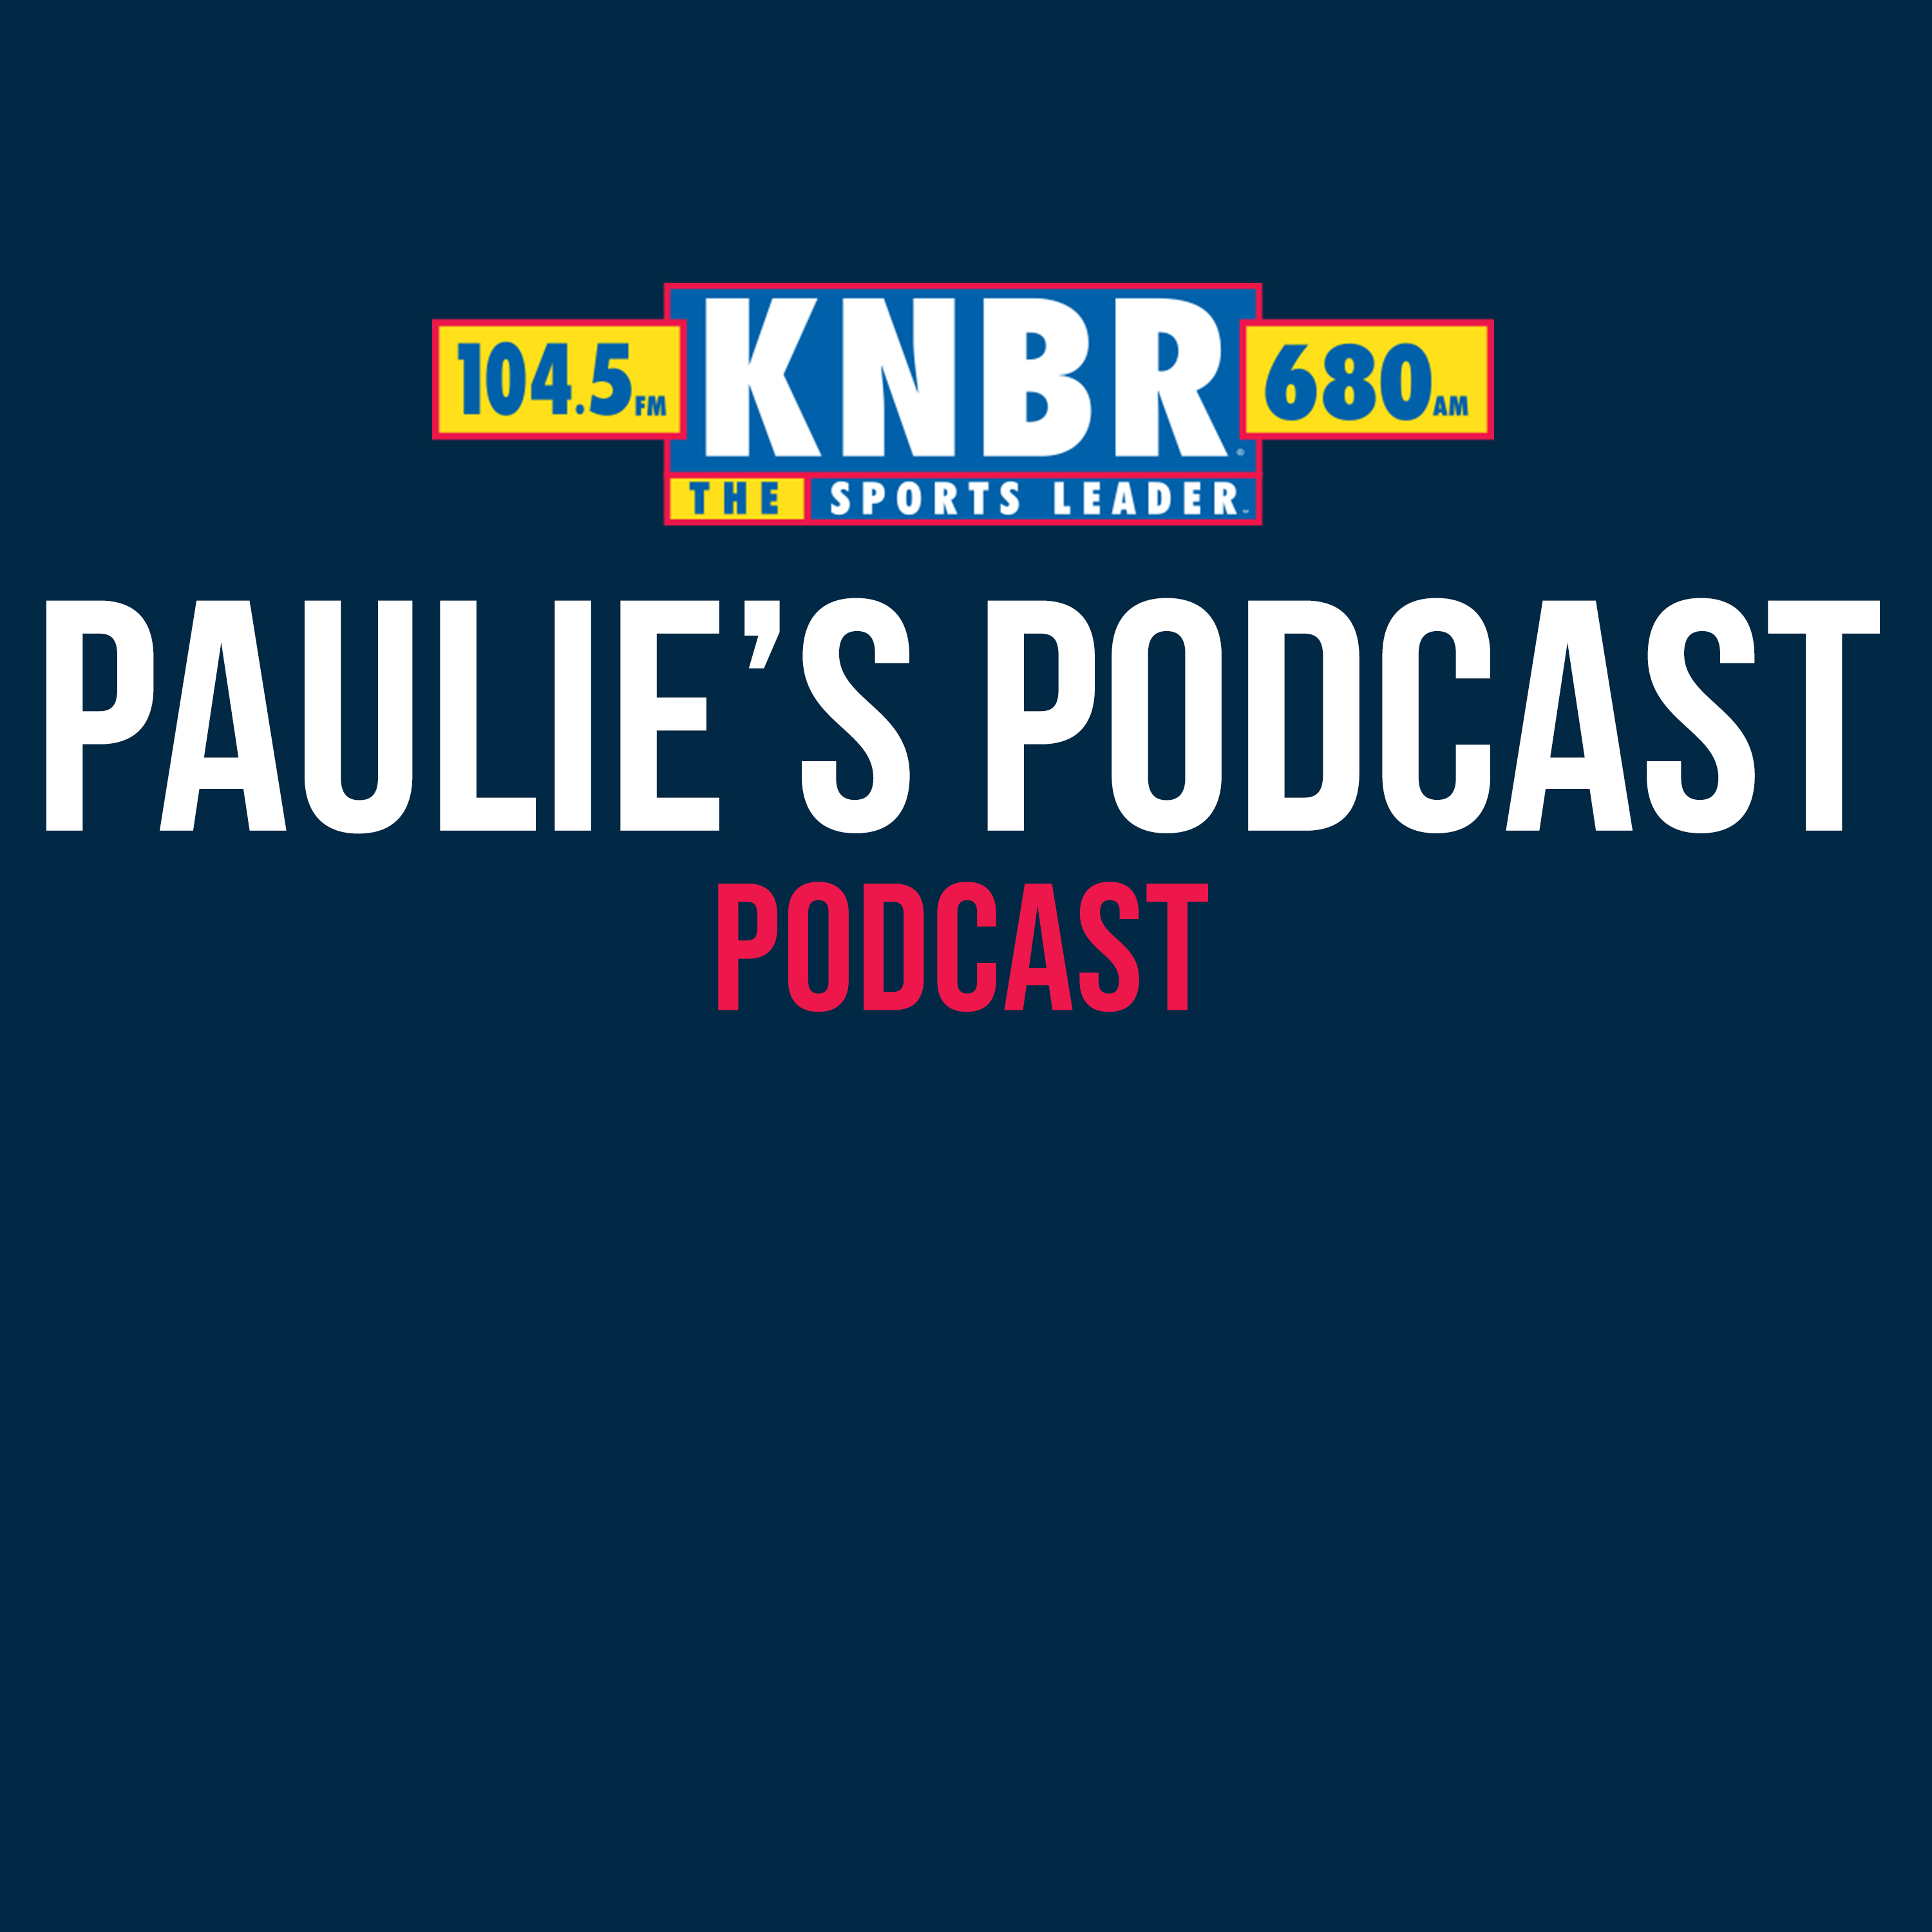 4/8 Paulie's Podcast: Hot Dog Do's & Don'ts On Opening Day